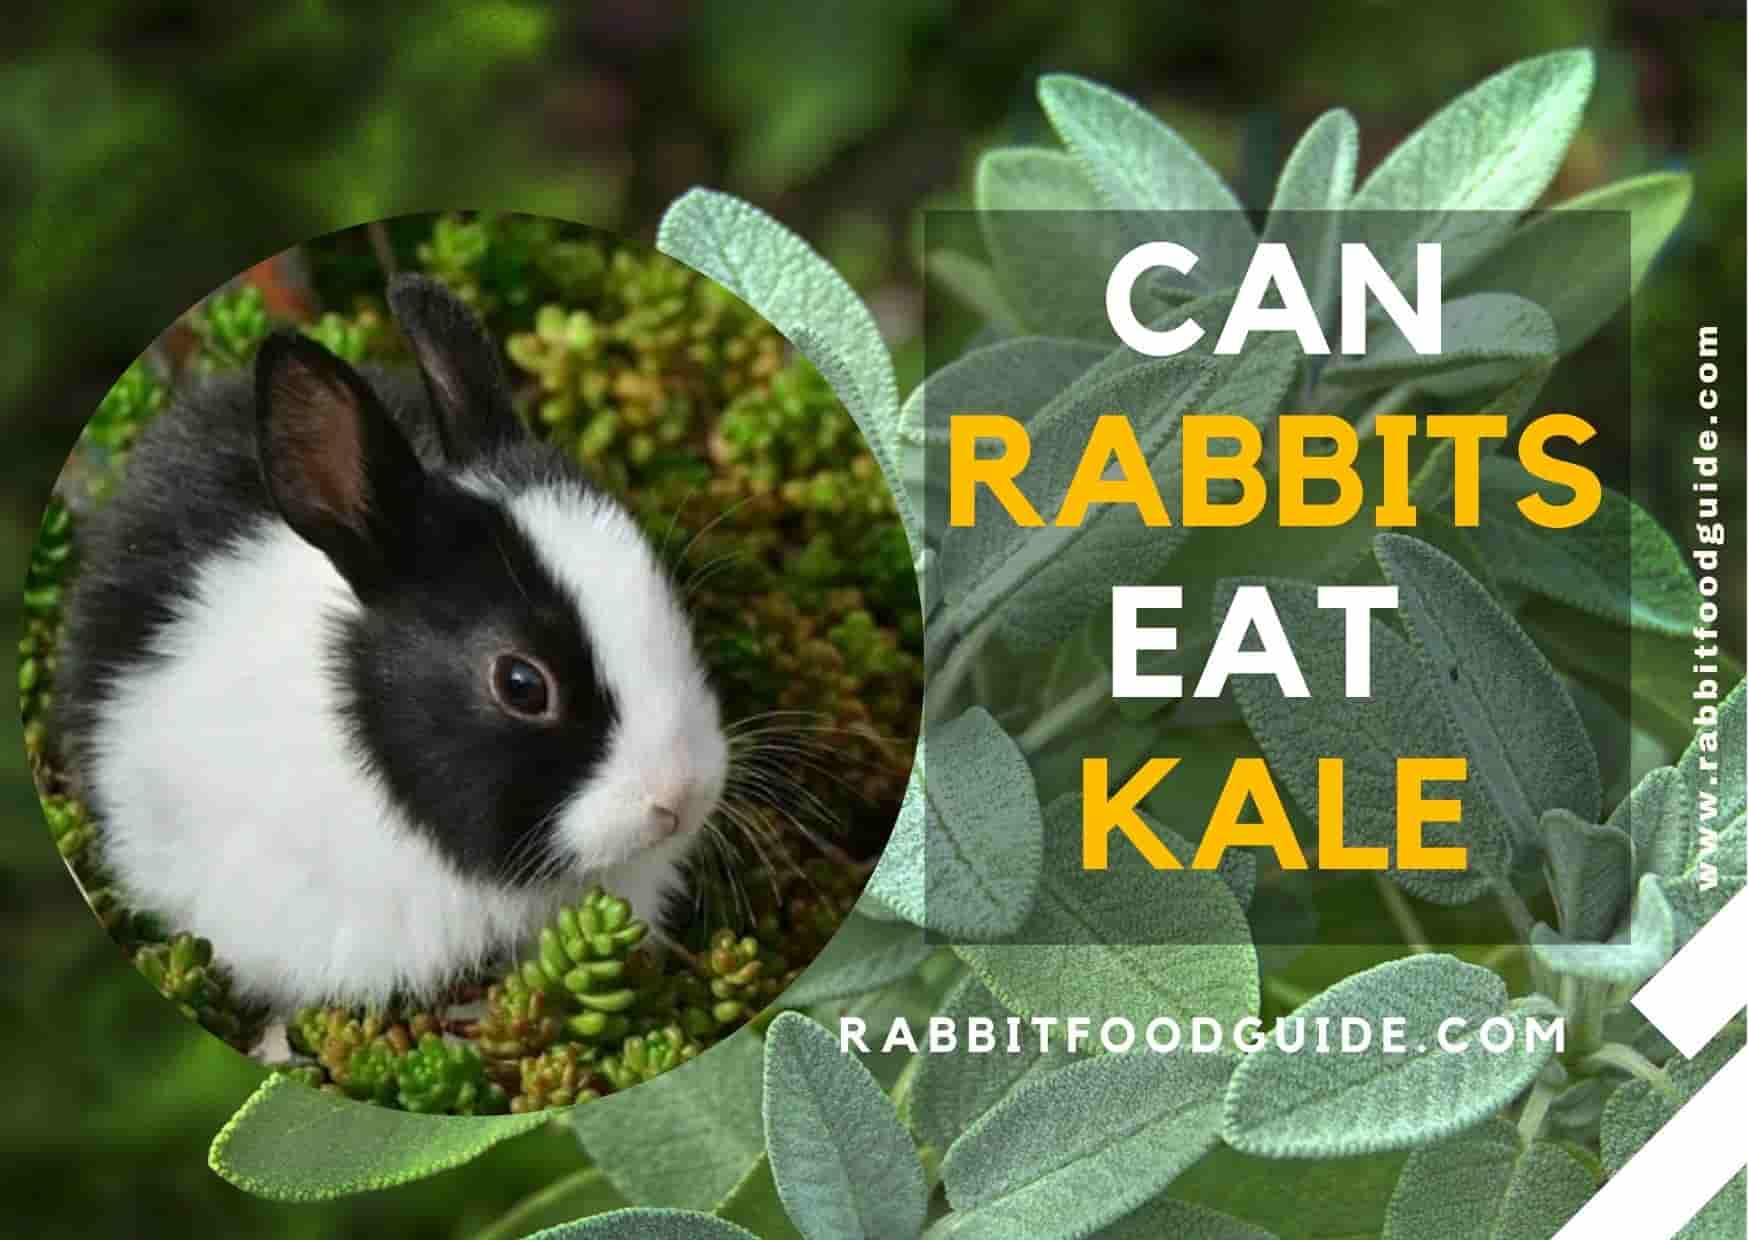 can rabbits eat kale?